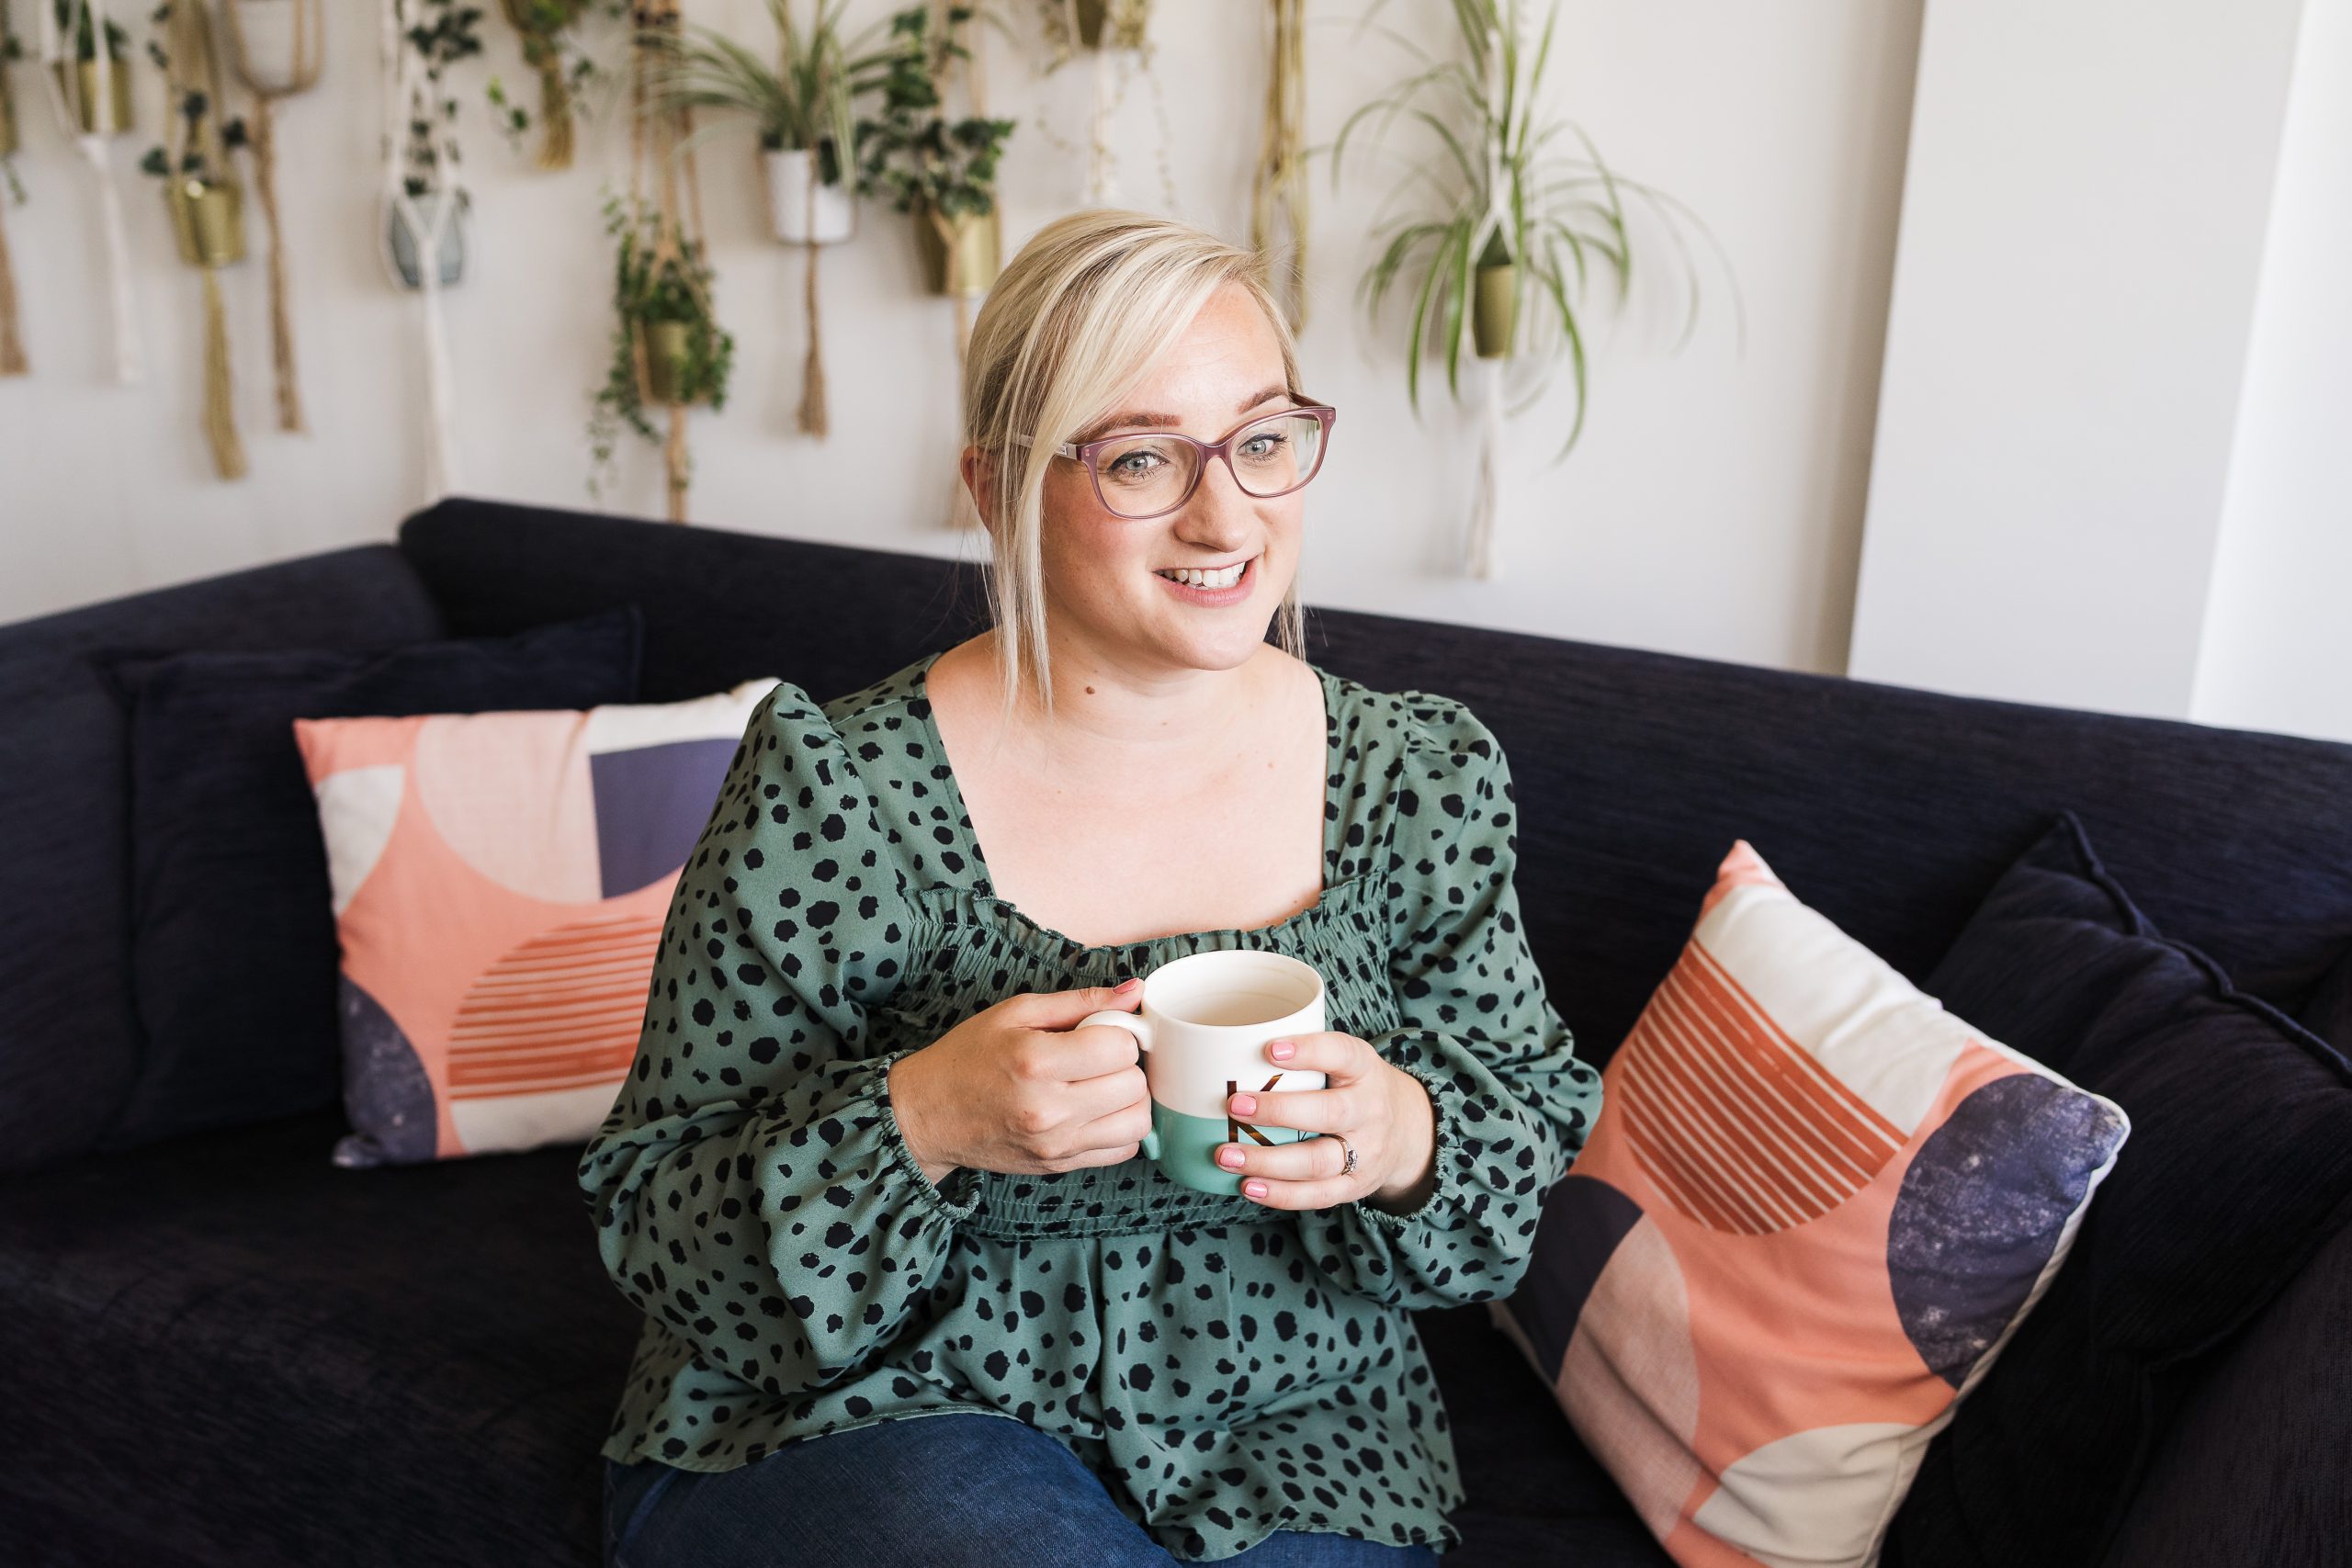 Katie, a white woman with blonde hair and glasses sat on a sofa with a cup of tea.